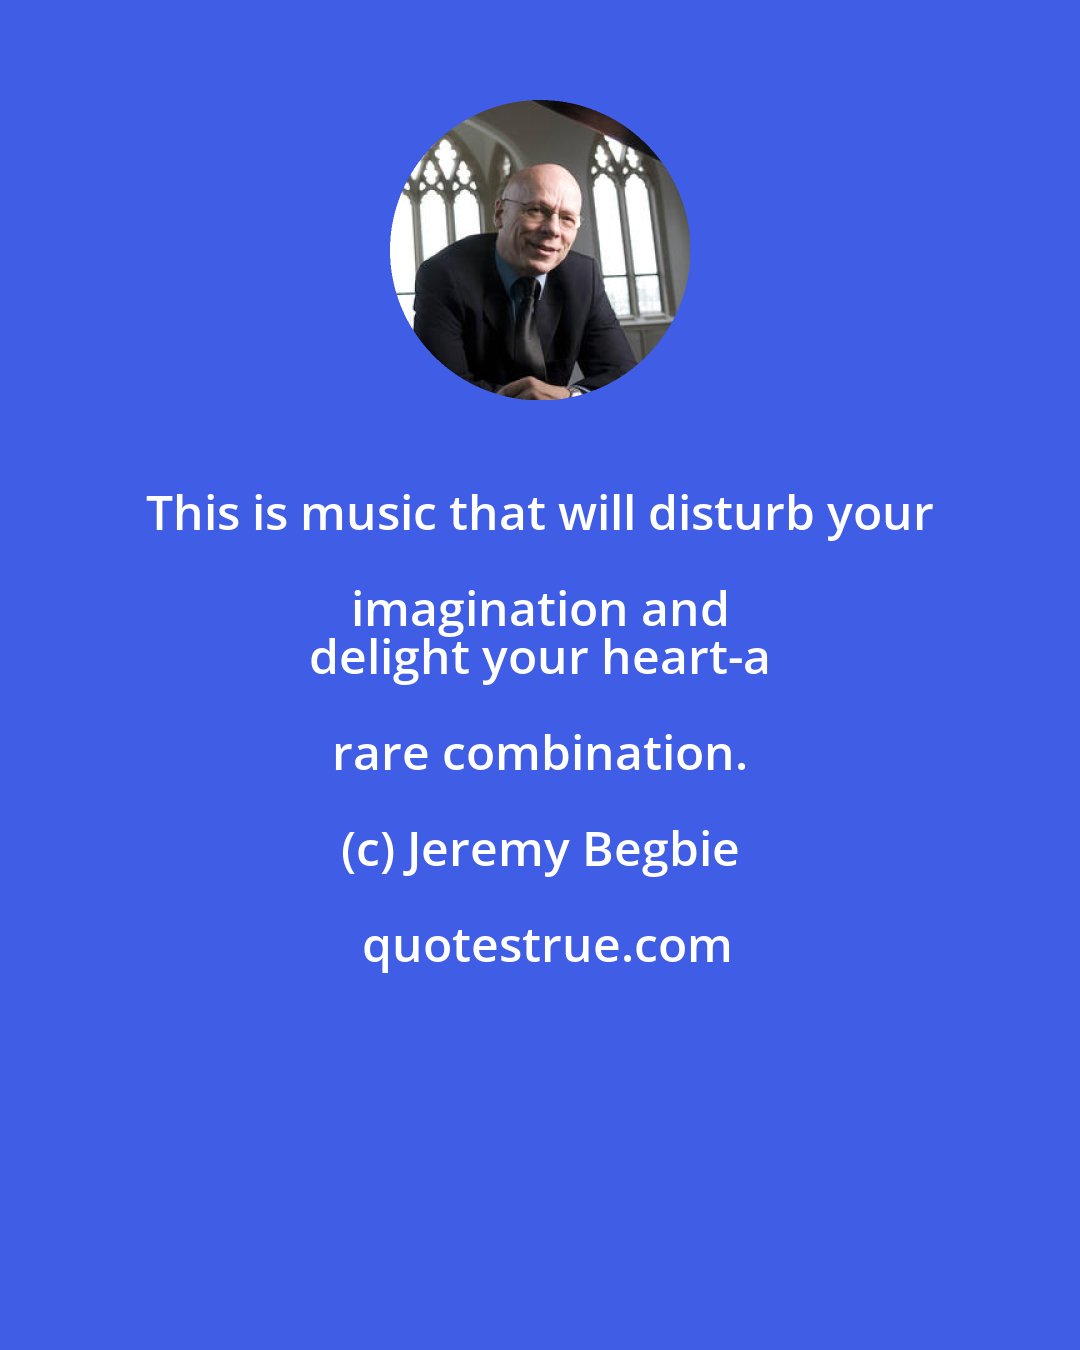 Jeremy Begbie: This is music that will disturb your imagination and 
 delight your heart-a rare combination.